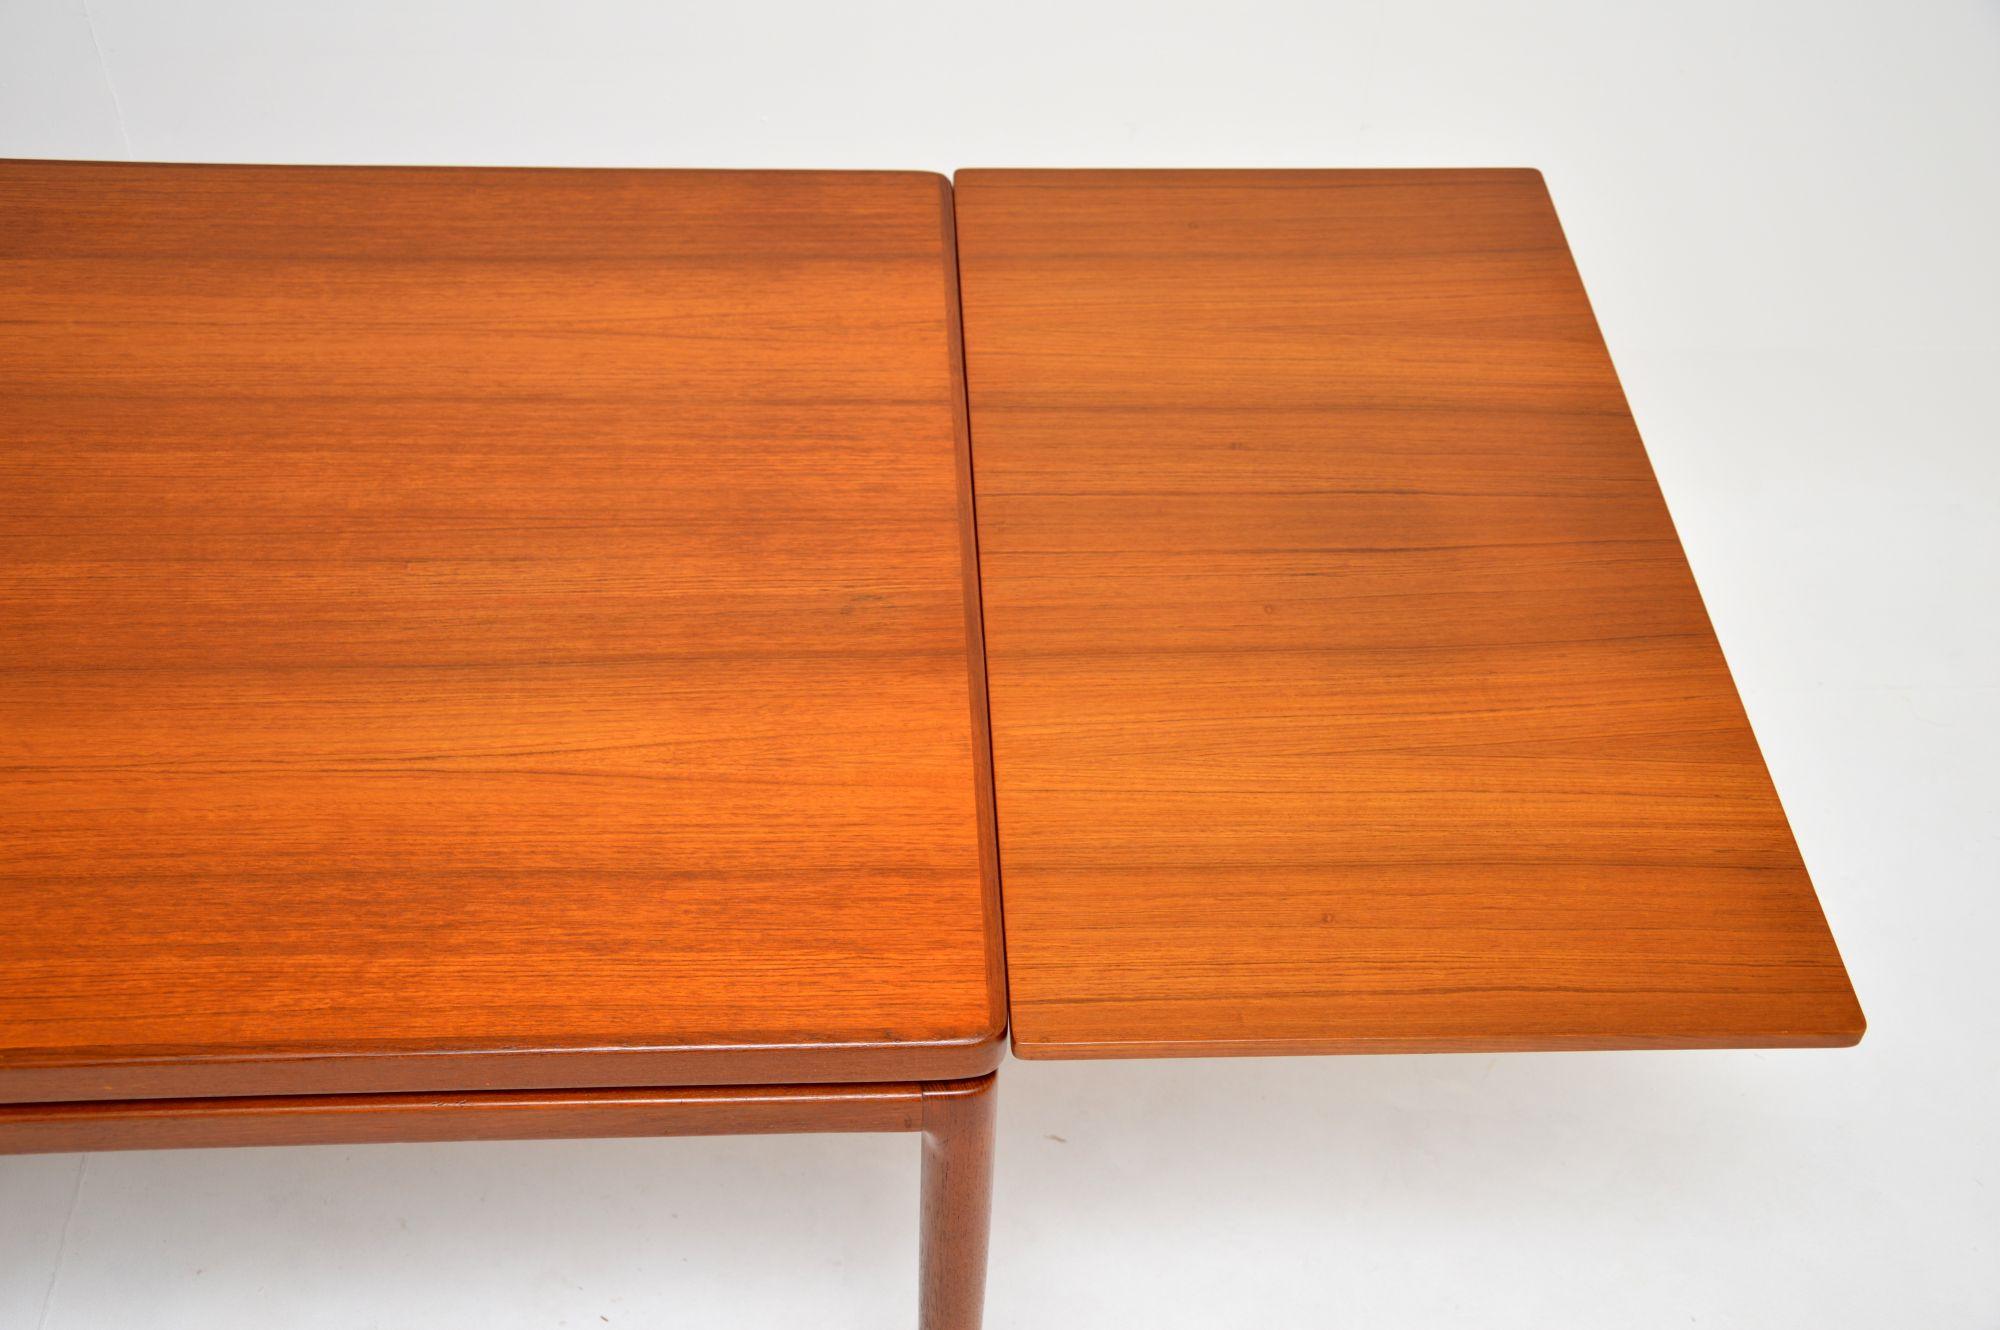 Leather 1960's Danish Vintage Teak Dining Table & Chairs by Johannes Andersen